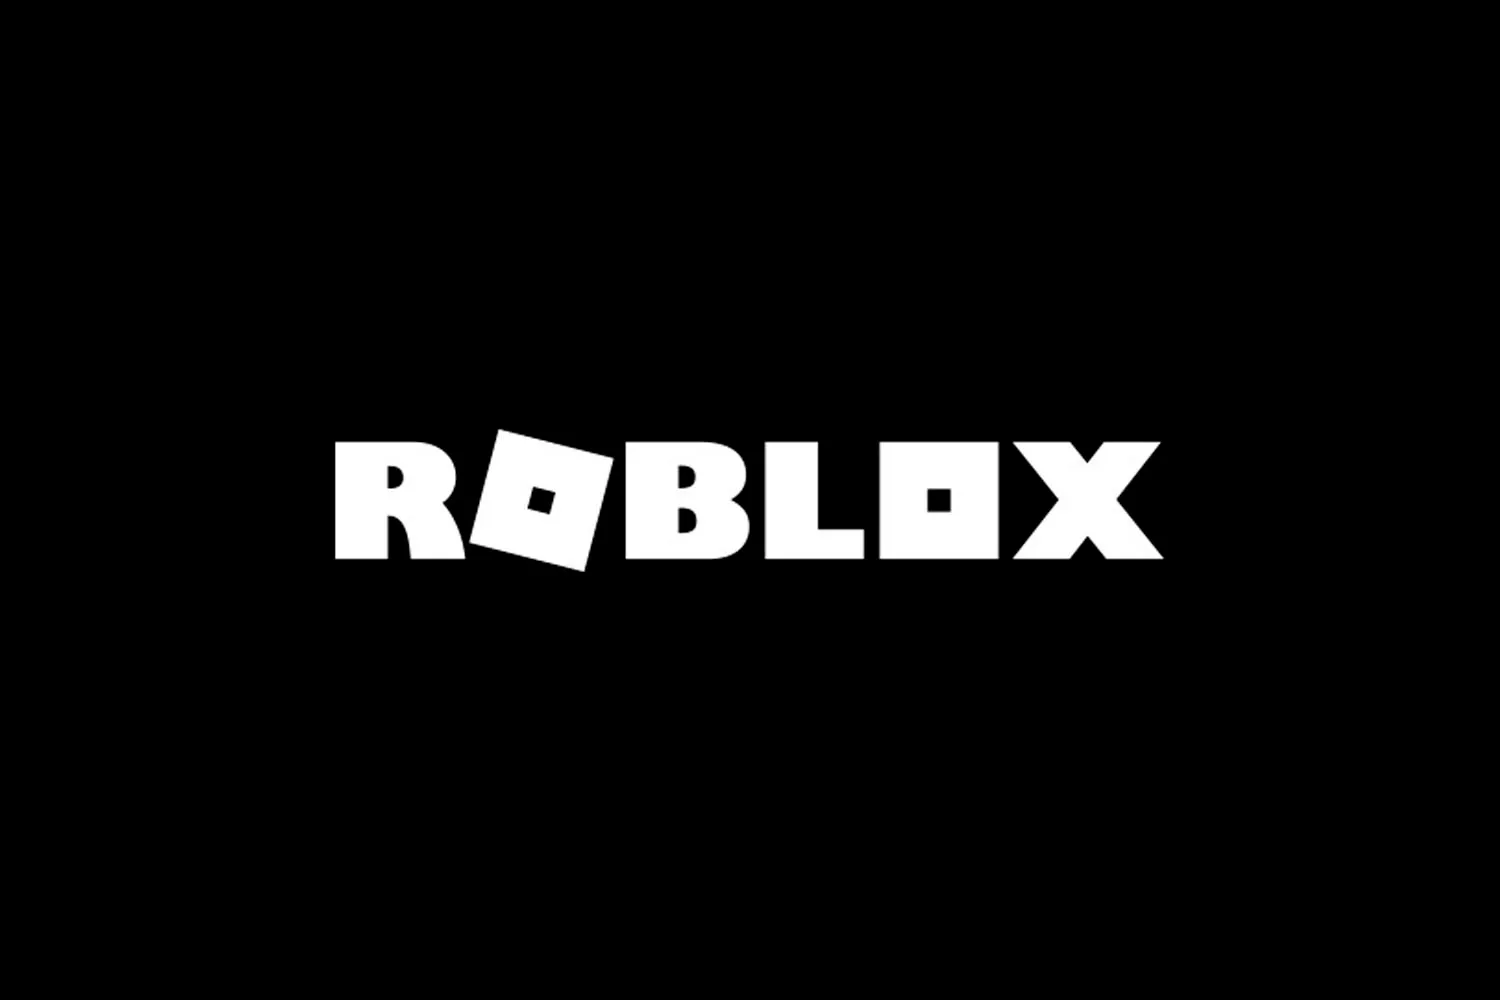 how to make a game in roblox